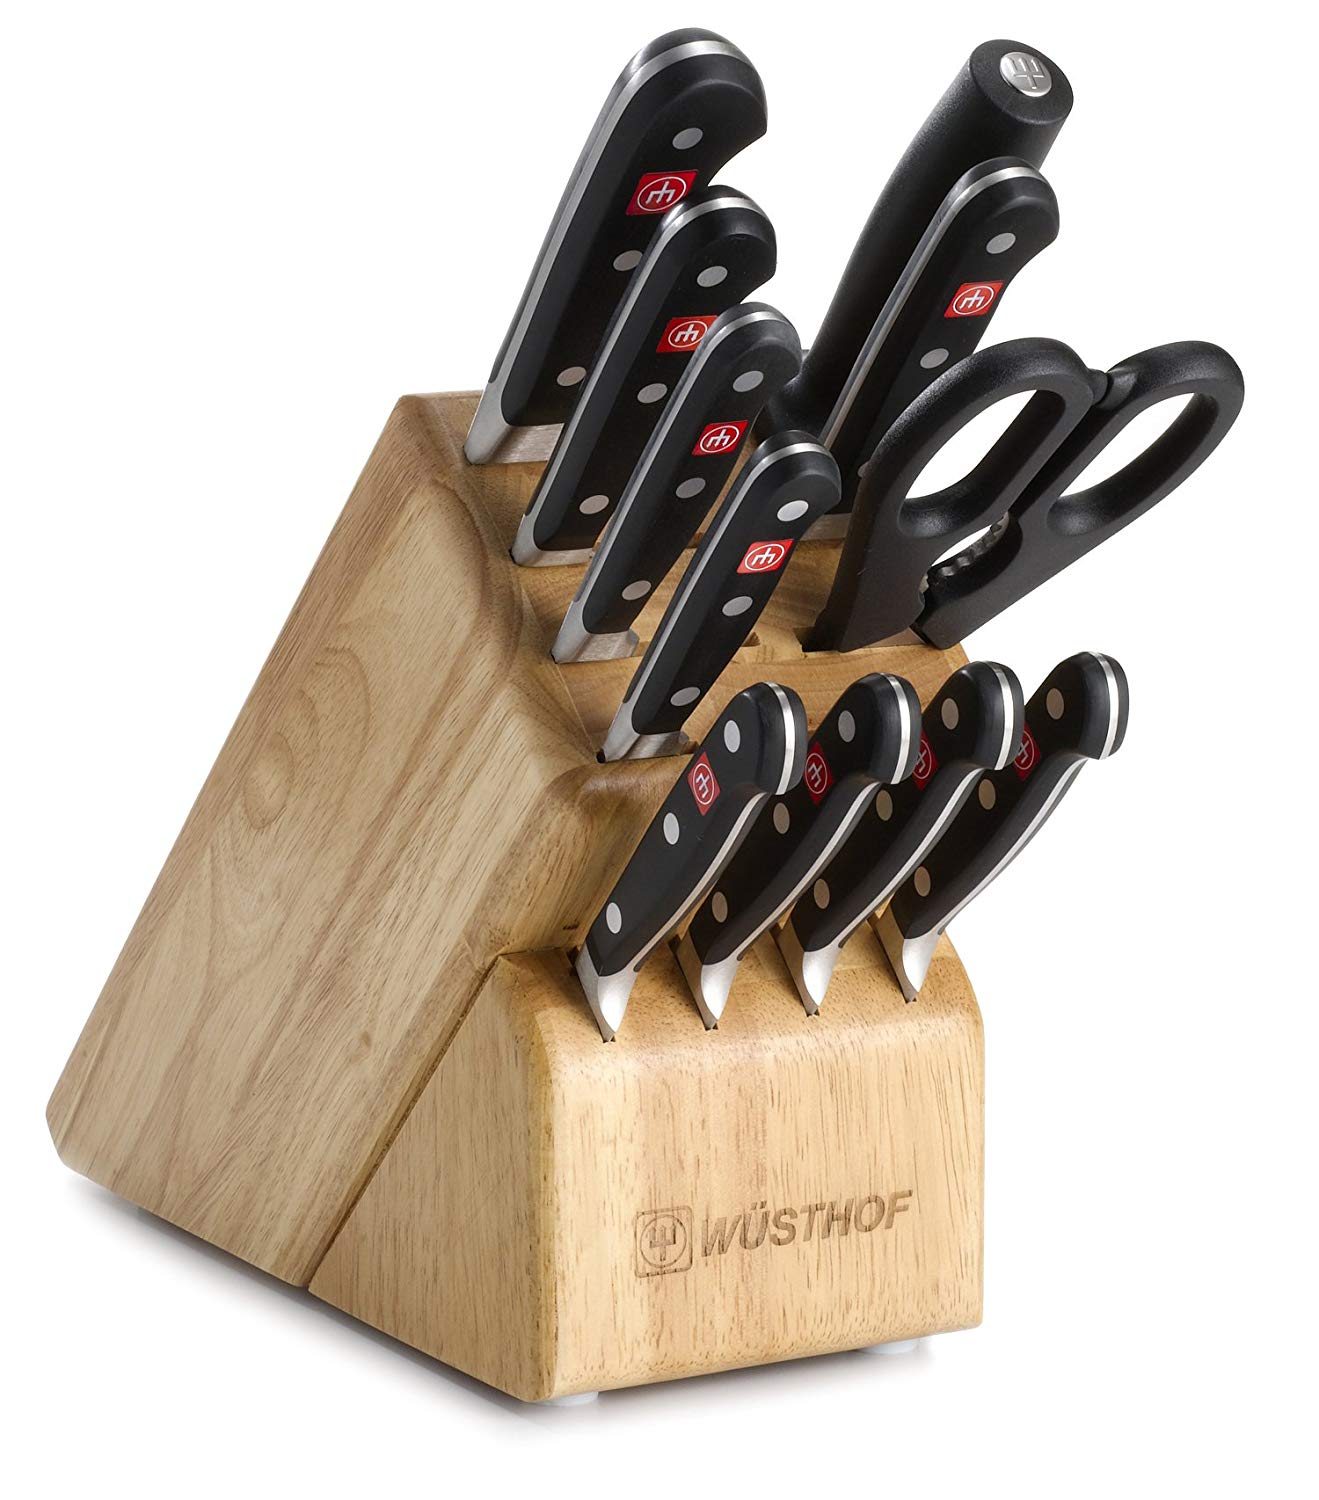 Wusthof Classic Knives Cutlery Set with Storage Block, 12 Piece